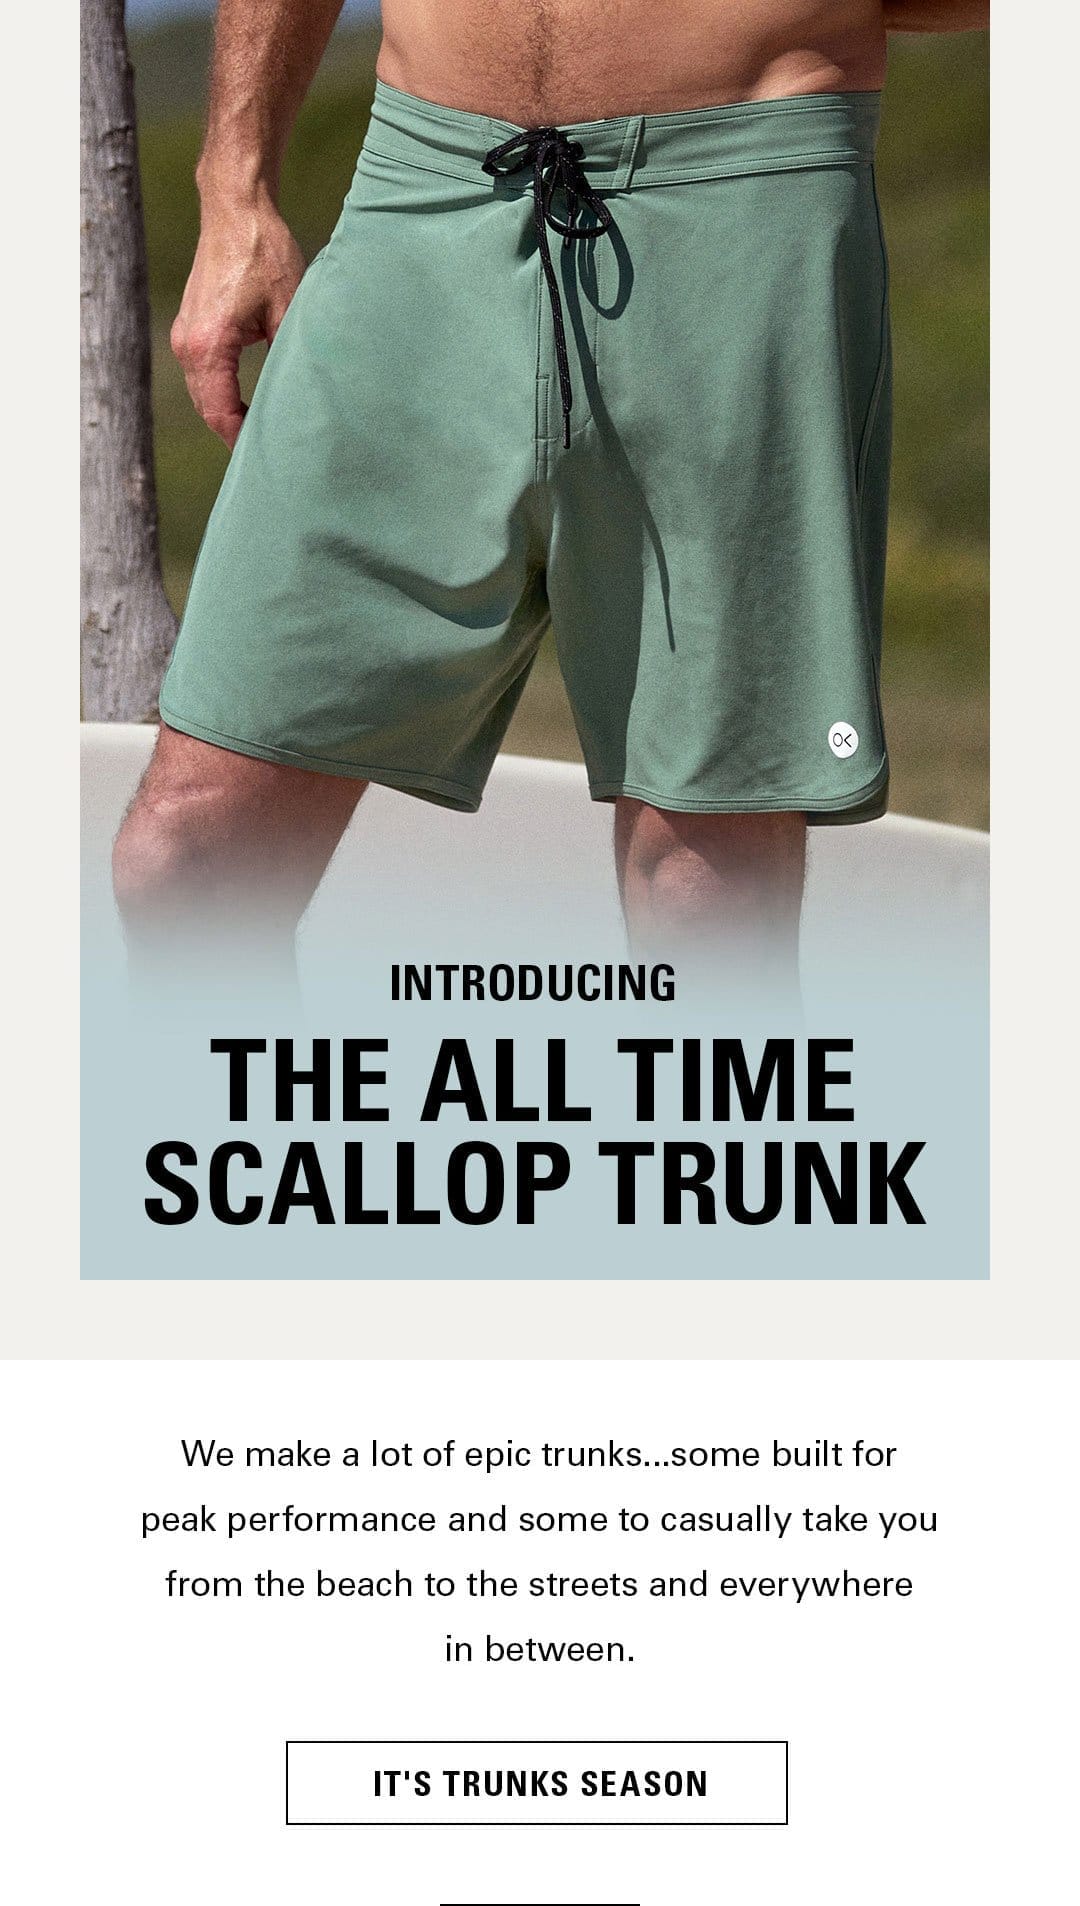 The All Time Scallop Trunks